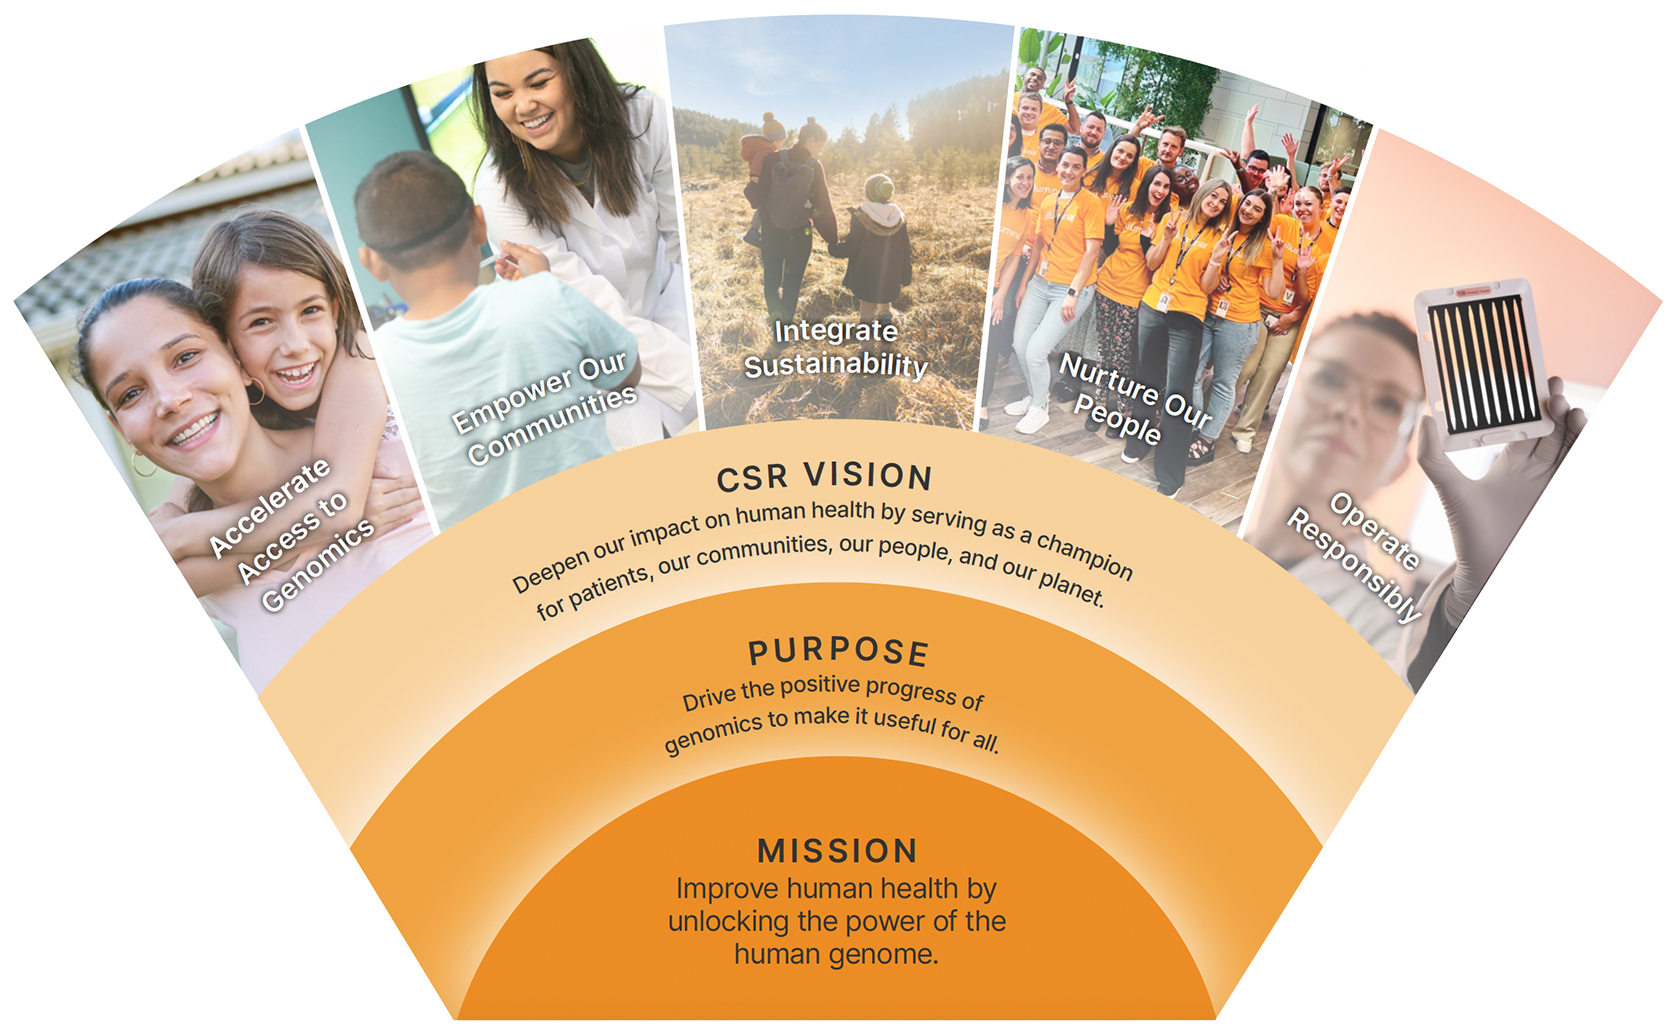 Our CSR Vision - deepening our impact on human health by serving as a champion for patients, our communities, our people, and our planet.